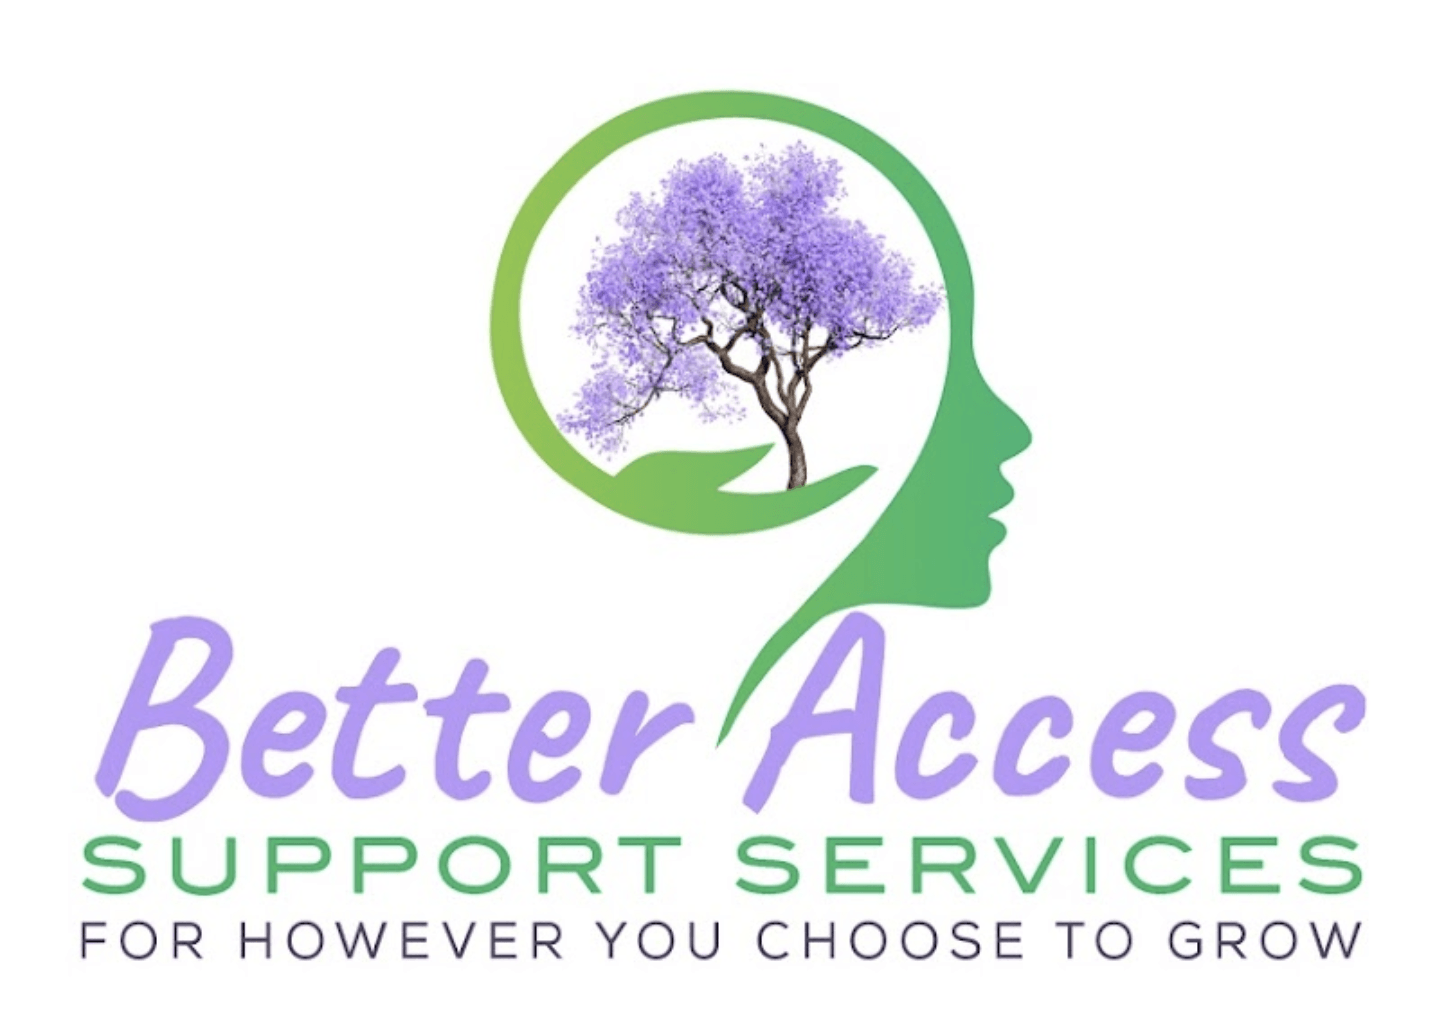 Better Access Support Services in Toowoomba